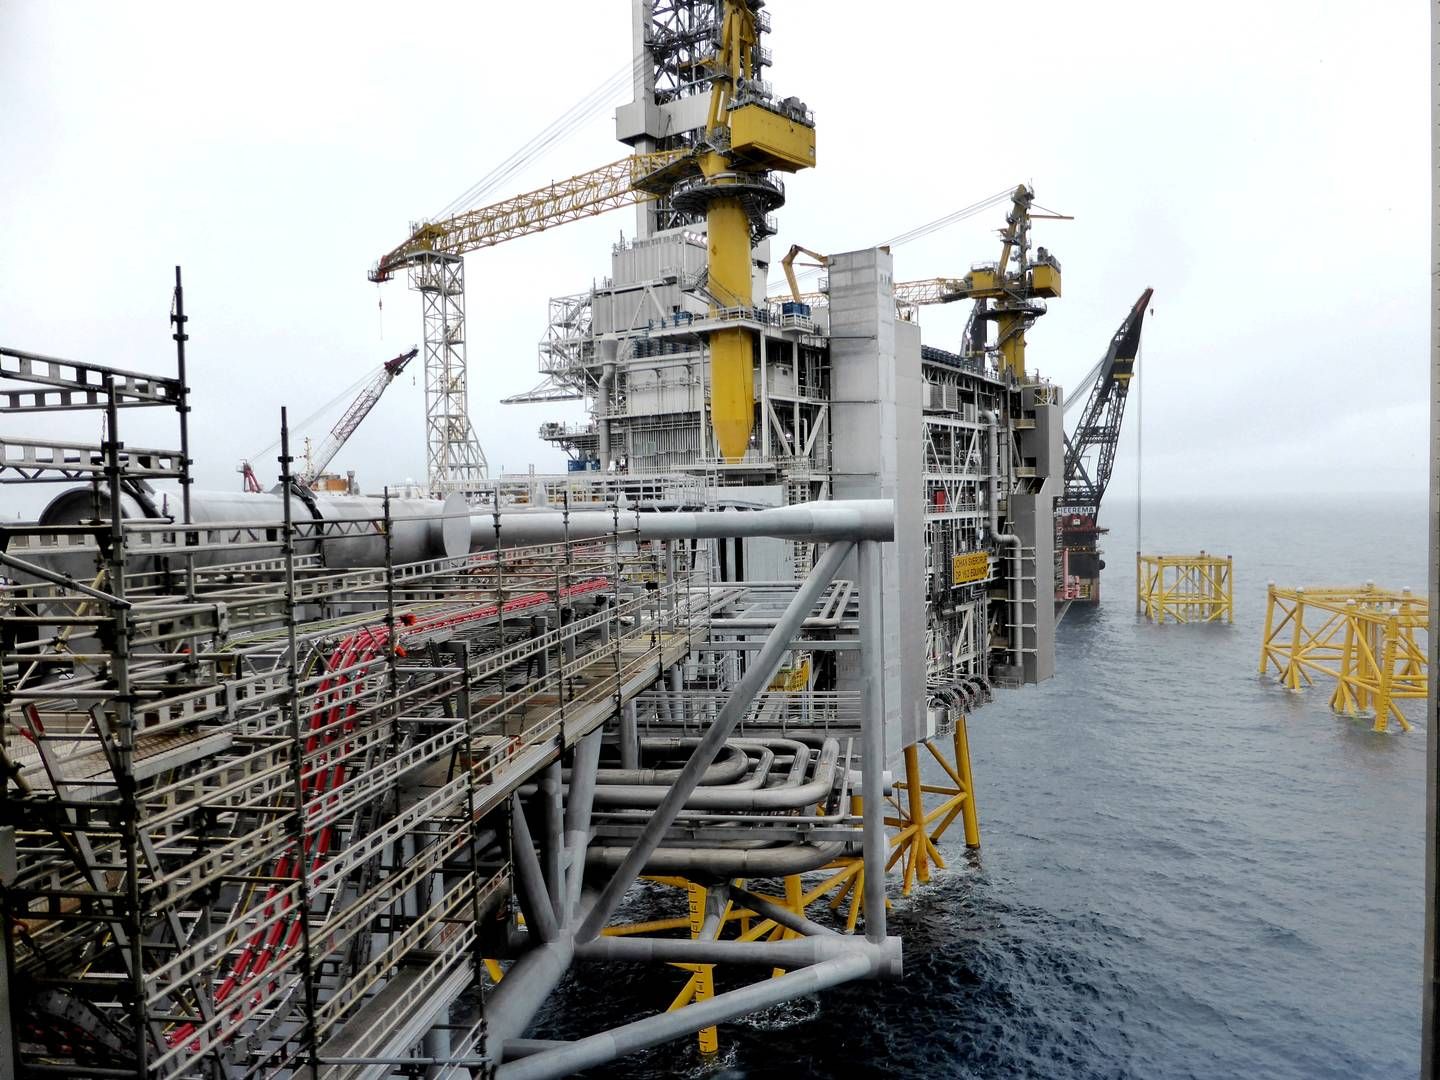 The recoverable resources are estimated at more than 300 million barrels of oil for phases 1 and 2, with the estimate for phase 1 being 245 million barrels. | Photo: Nerijus Adomaitis